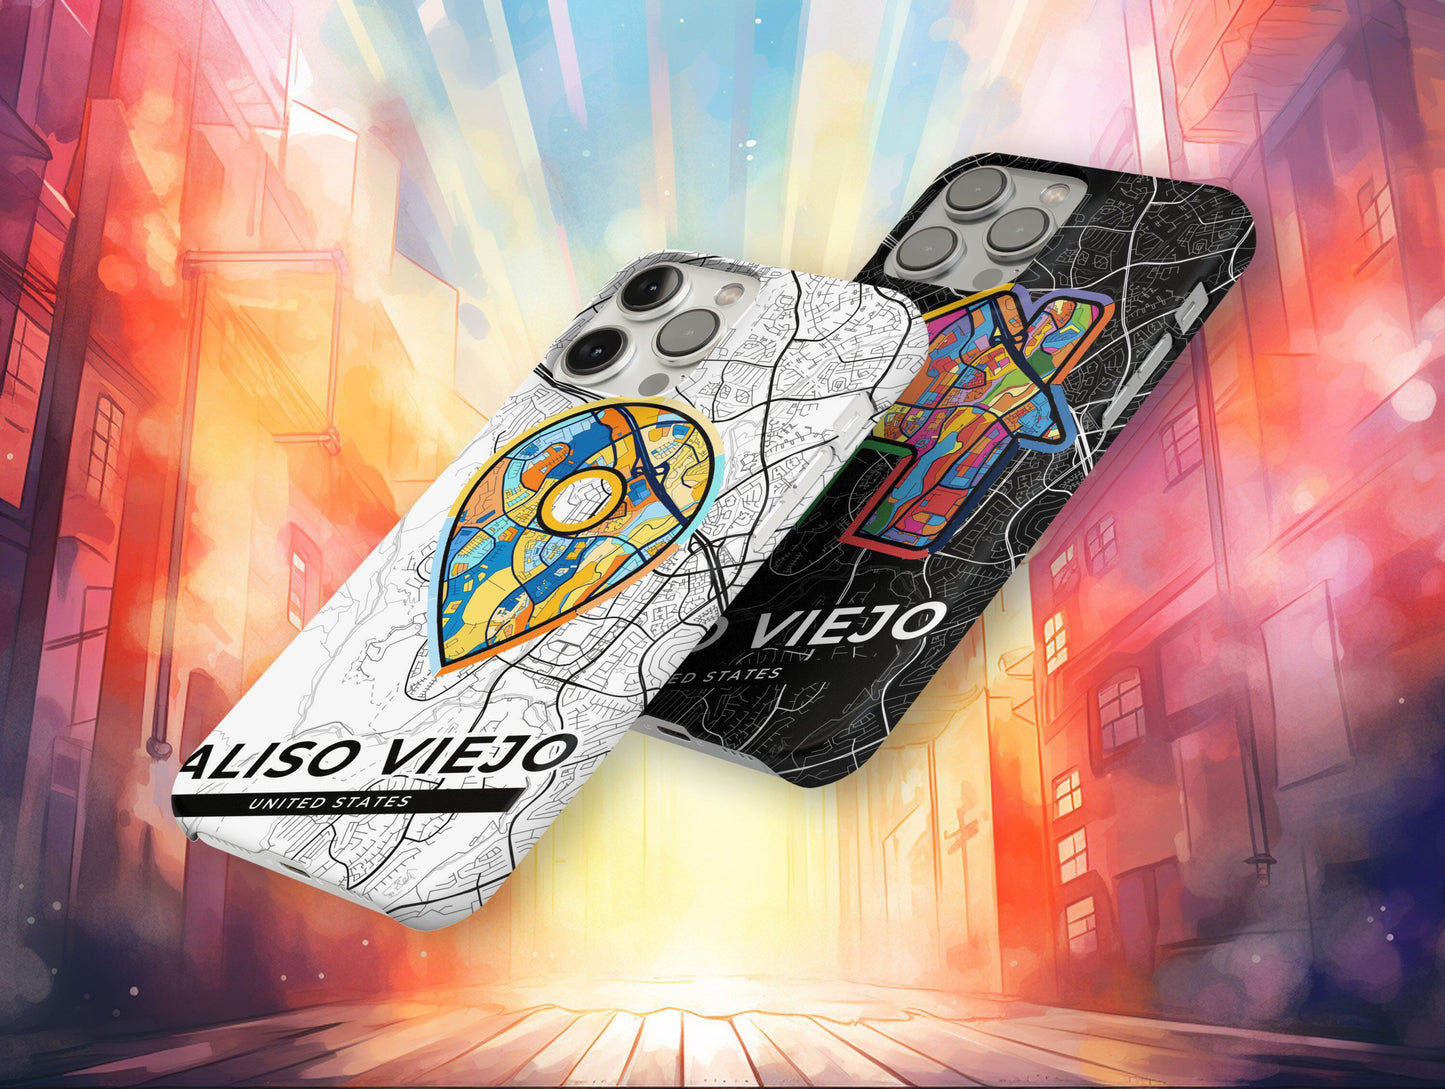 Aliso Viejo California slim phone case with colorful icon. Birthday, wedding or housewarming gift. Couple match cases.